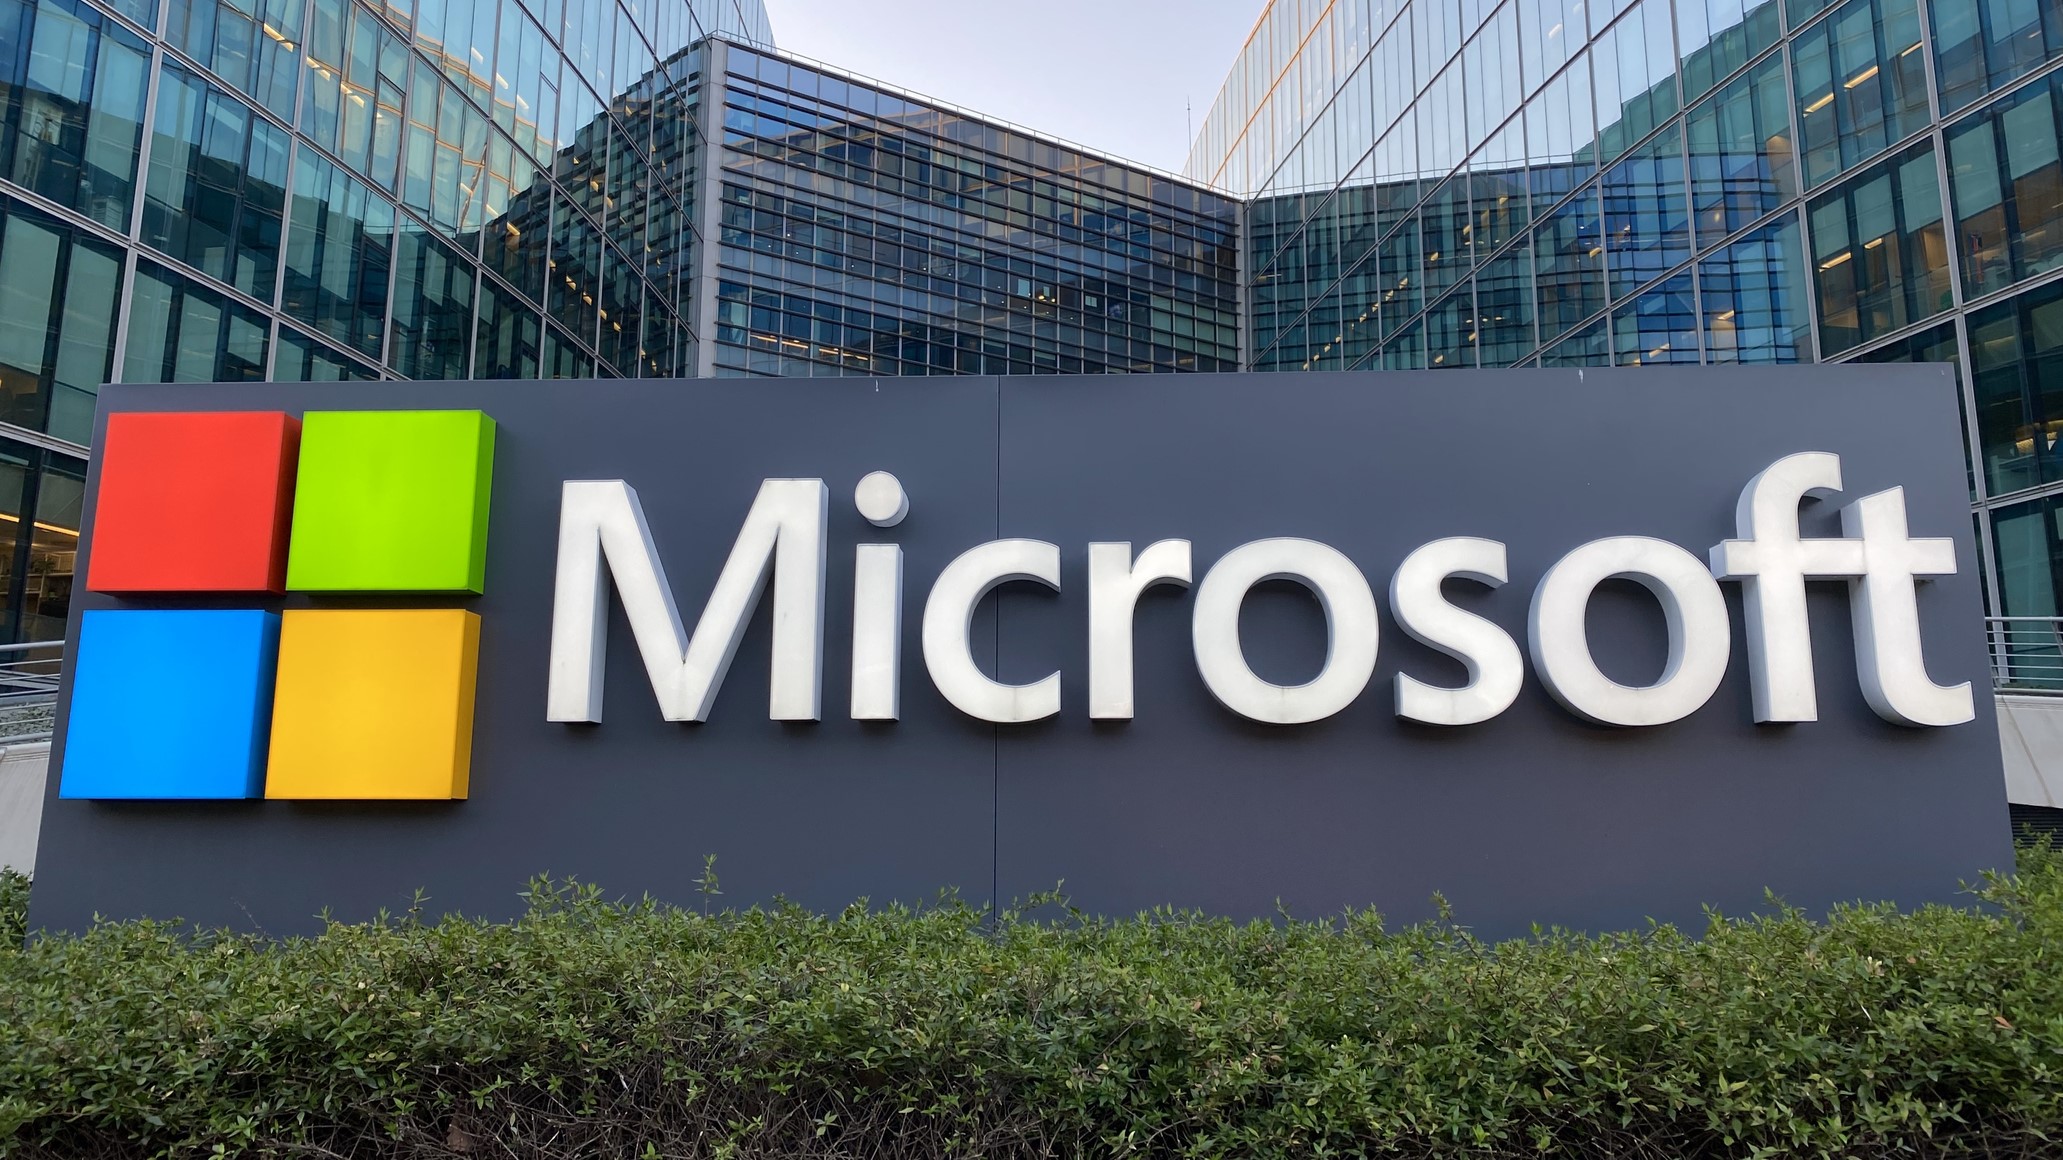 Microsoft is Expected to Lay Off Thousands of Employees Tomorrow